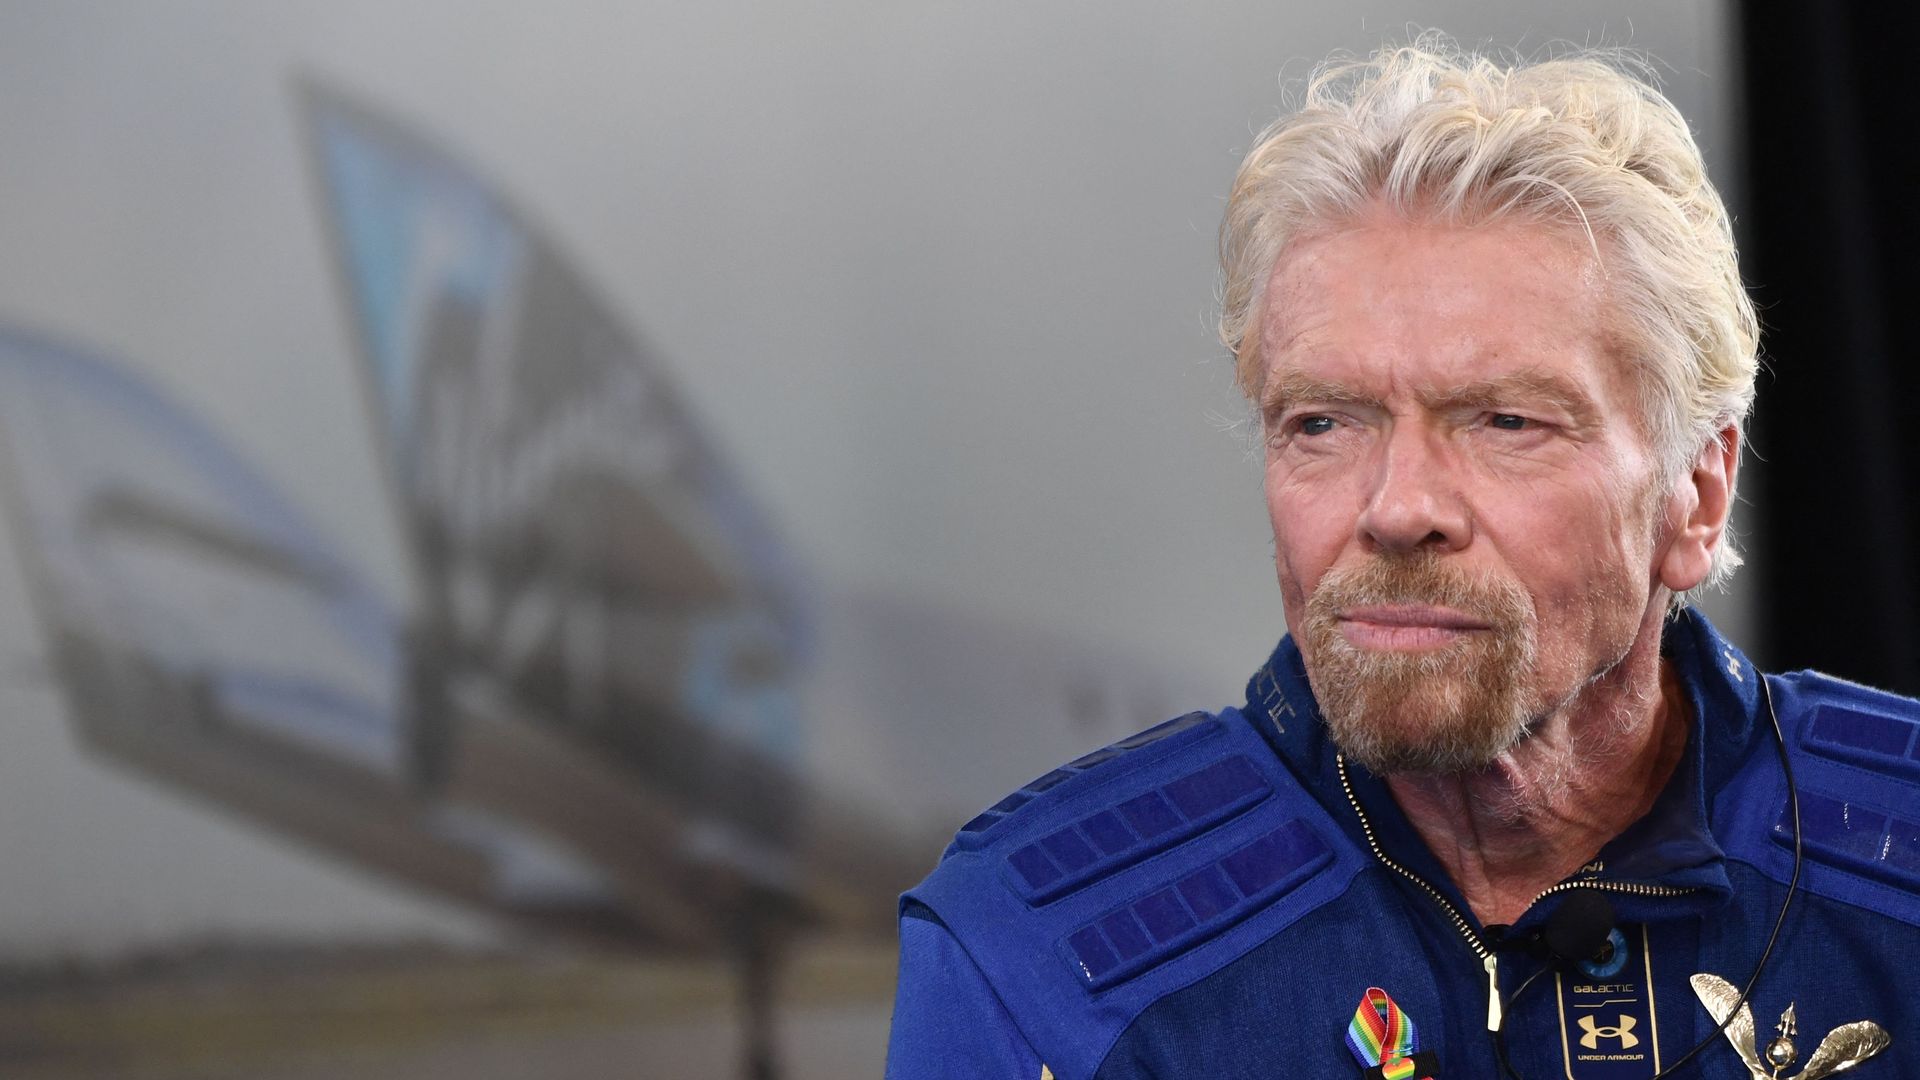 Richard Branson after flying to space aboard a Virgin Galactic vessel in July 2021.